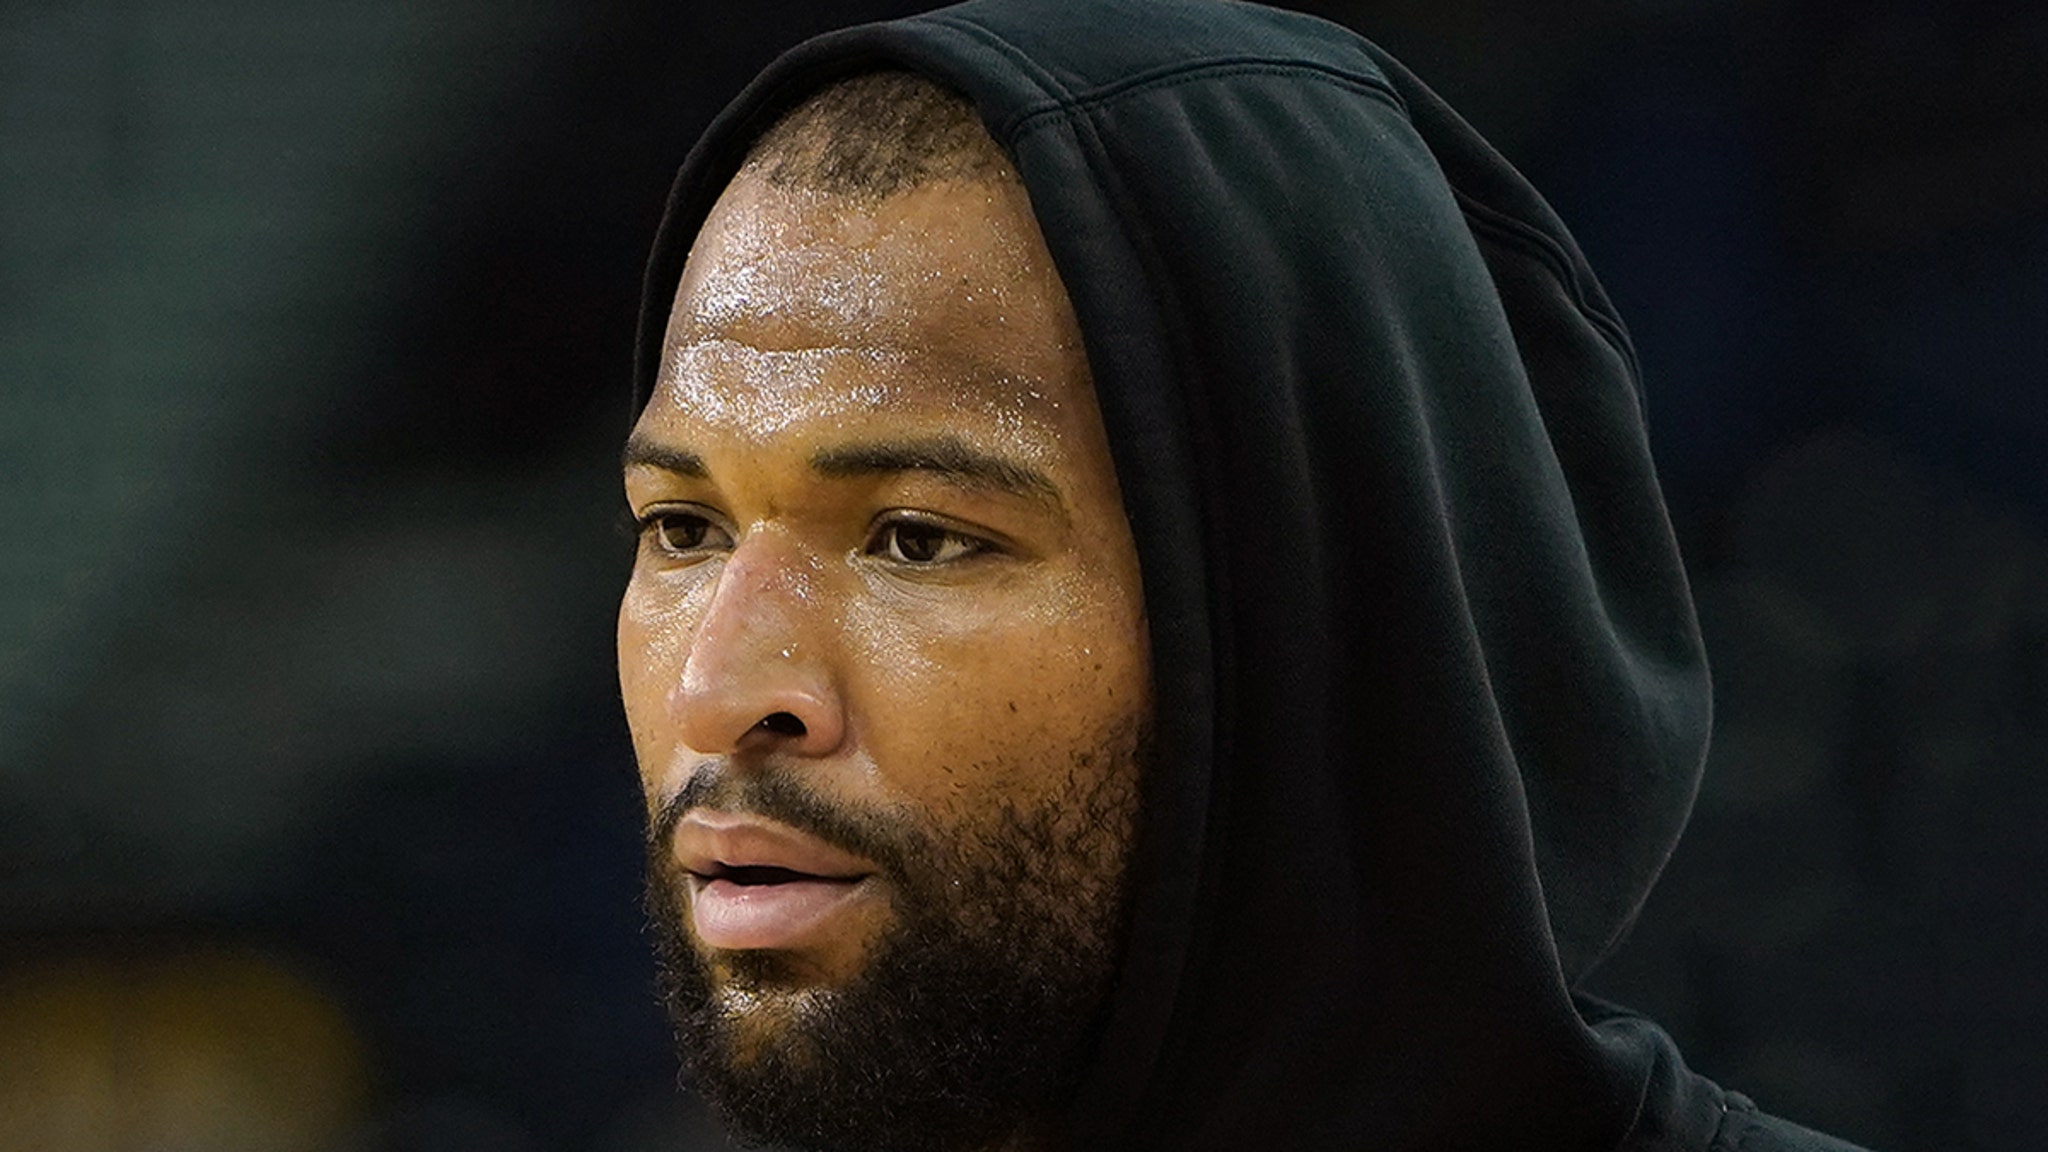 Demarcus Cousins Audio Allegedly Threatening To Shoot Baby Mama Before